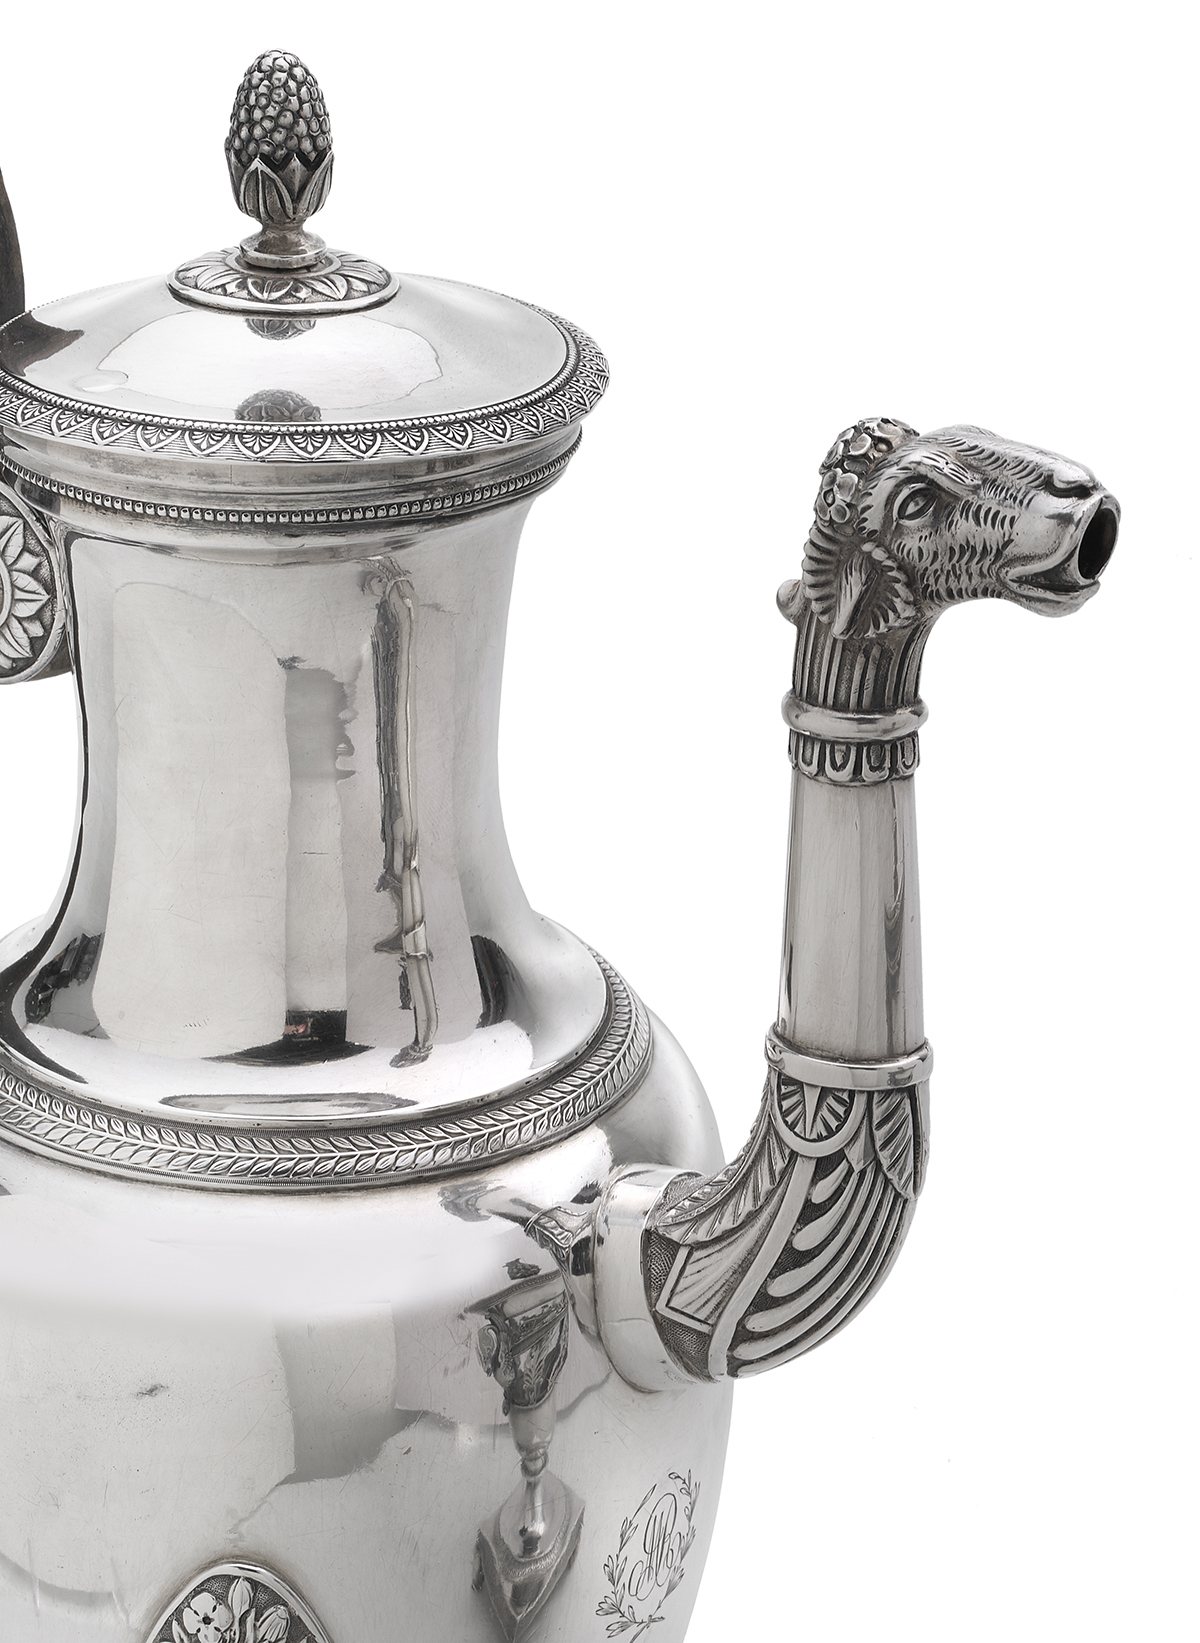 French Empire Silver Coffeepot and Sugar Urn - Image 2 of 3